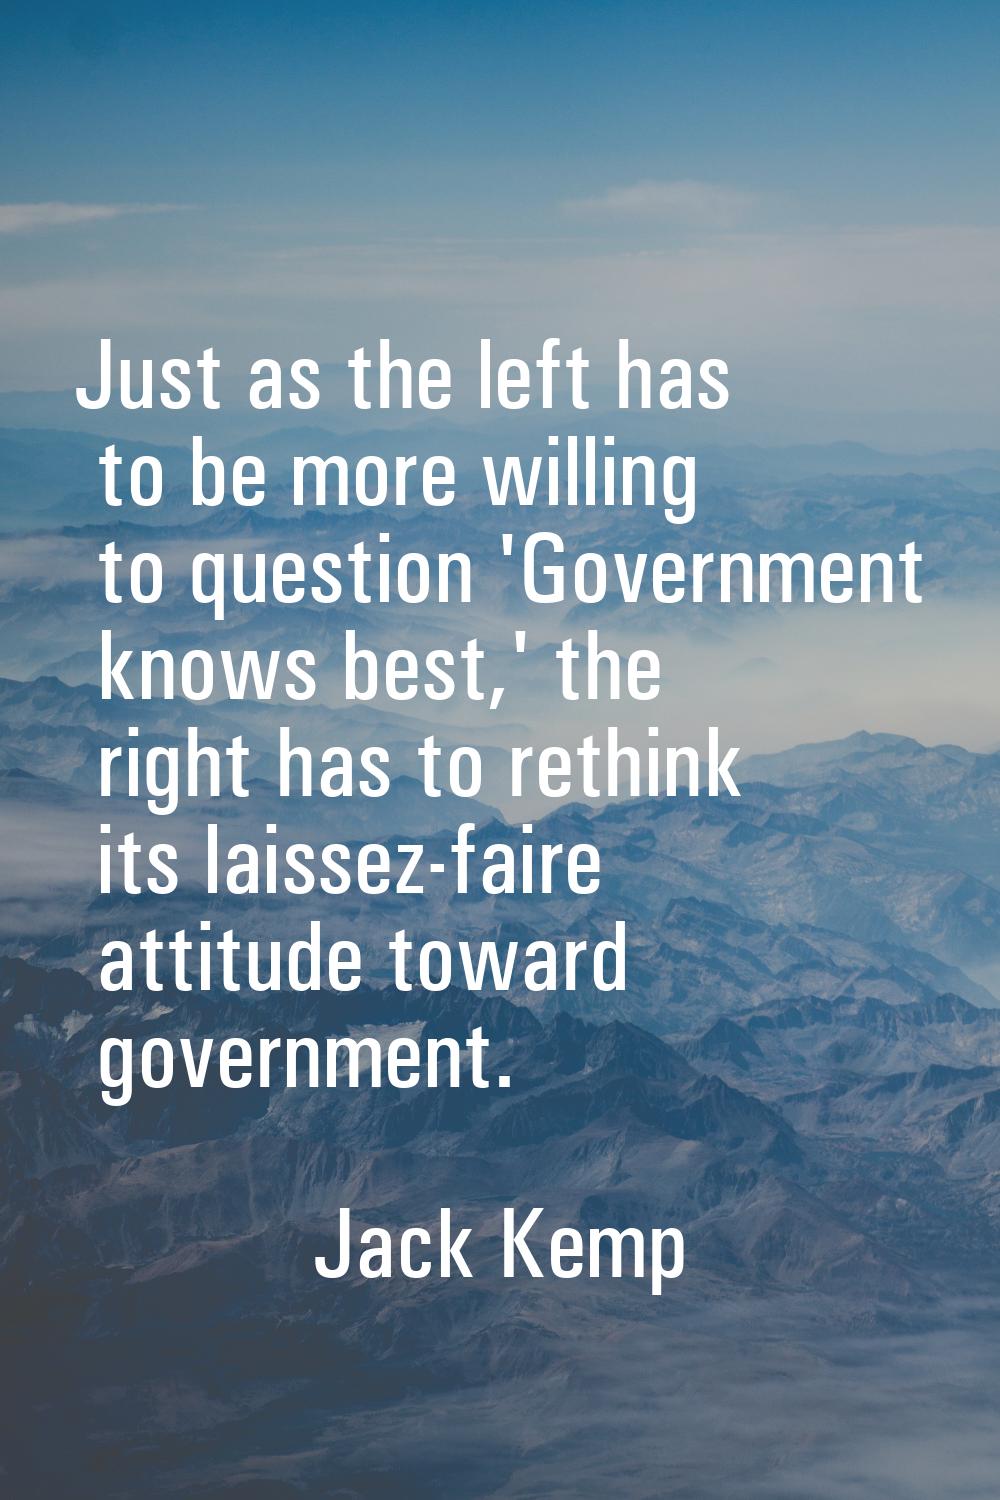 Just as the left has to be more willing to question 'Government knows best,' the right has to rethi